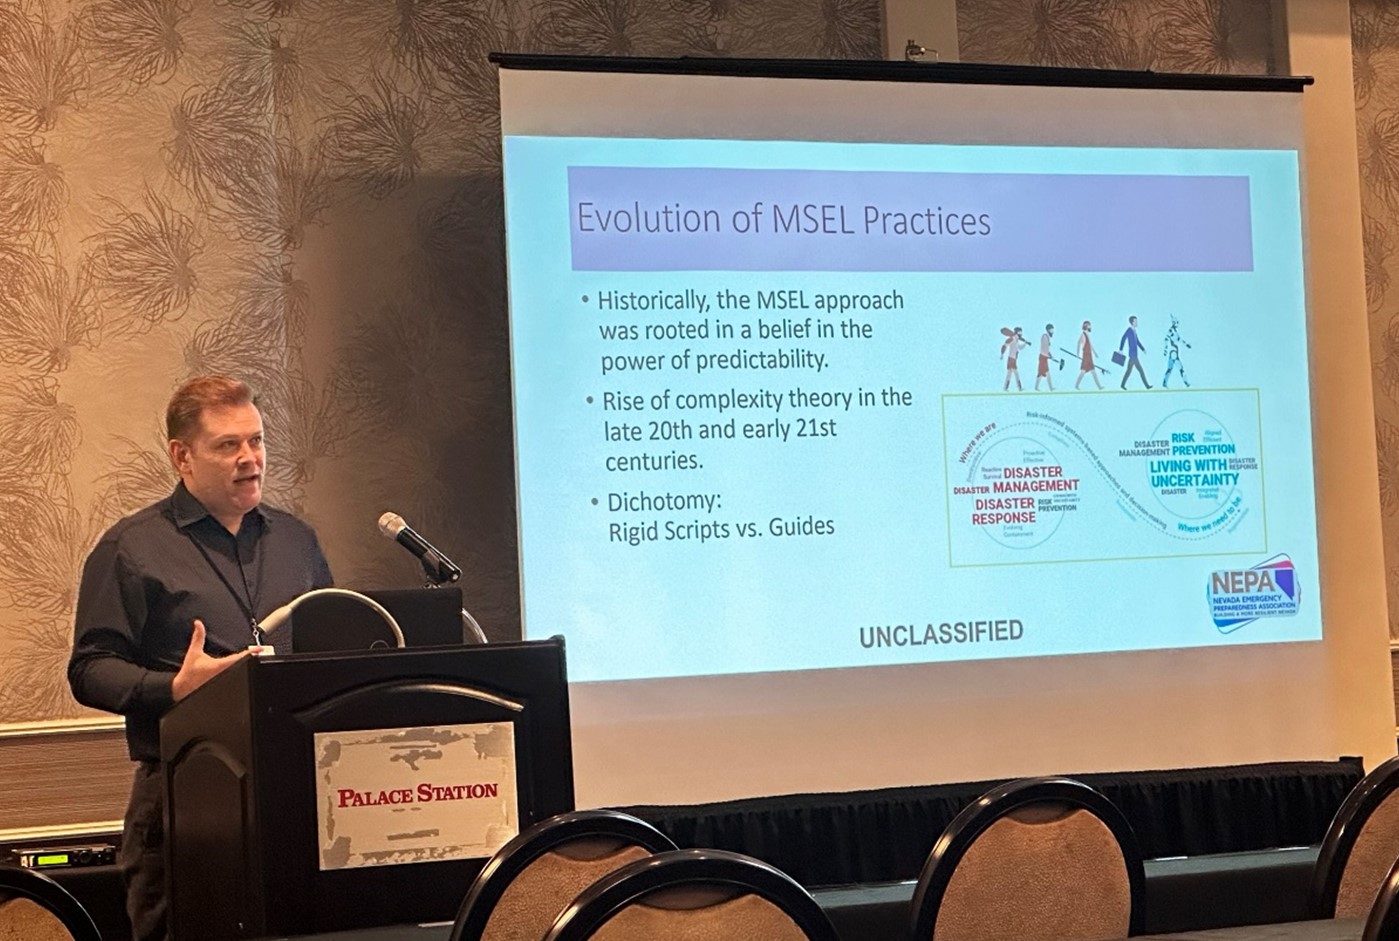 A NNSS Security and Emergency Services leader speaks at a podium in front of a presentation slide titled, "Evolution of MSEL Practices."